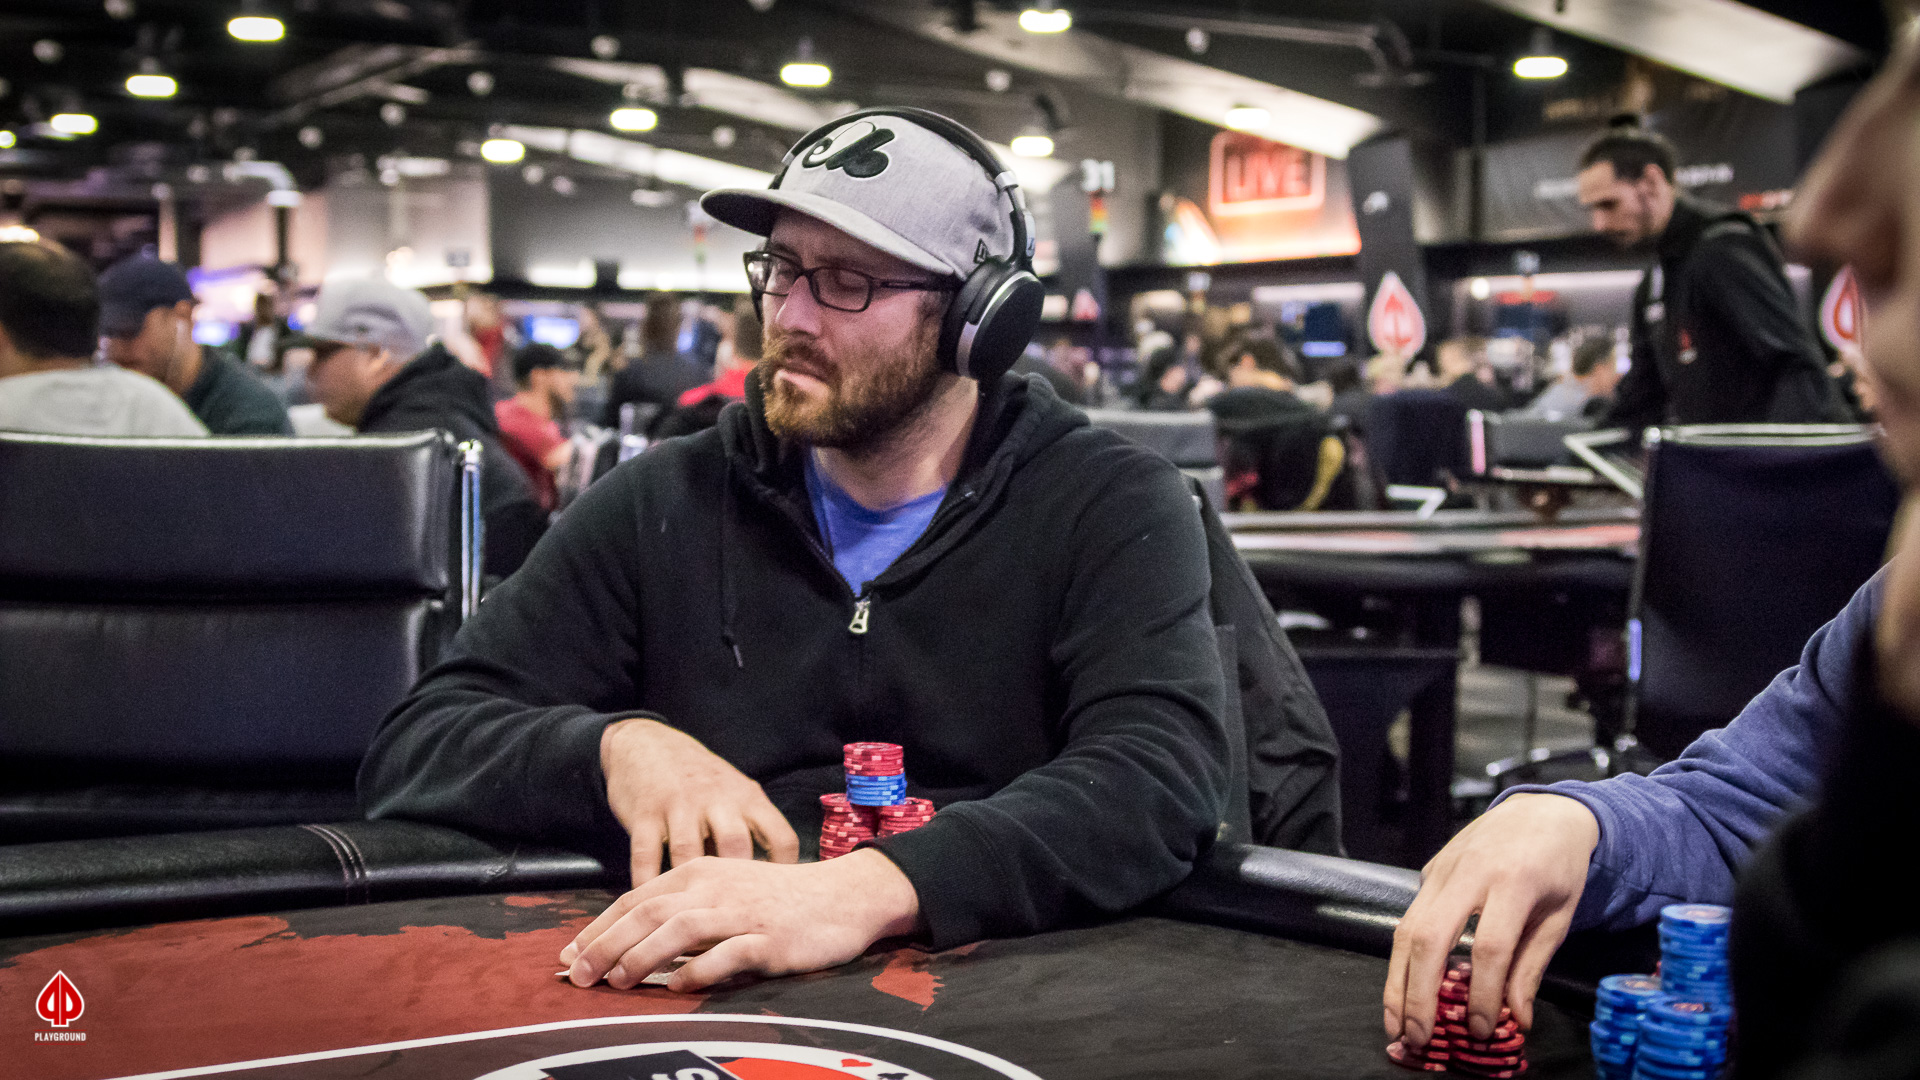 Strulovitch leaves in 3rd place ($14,064)